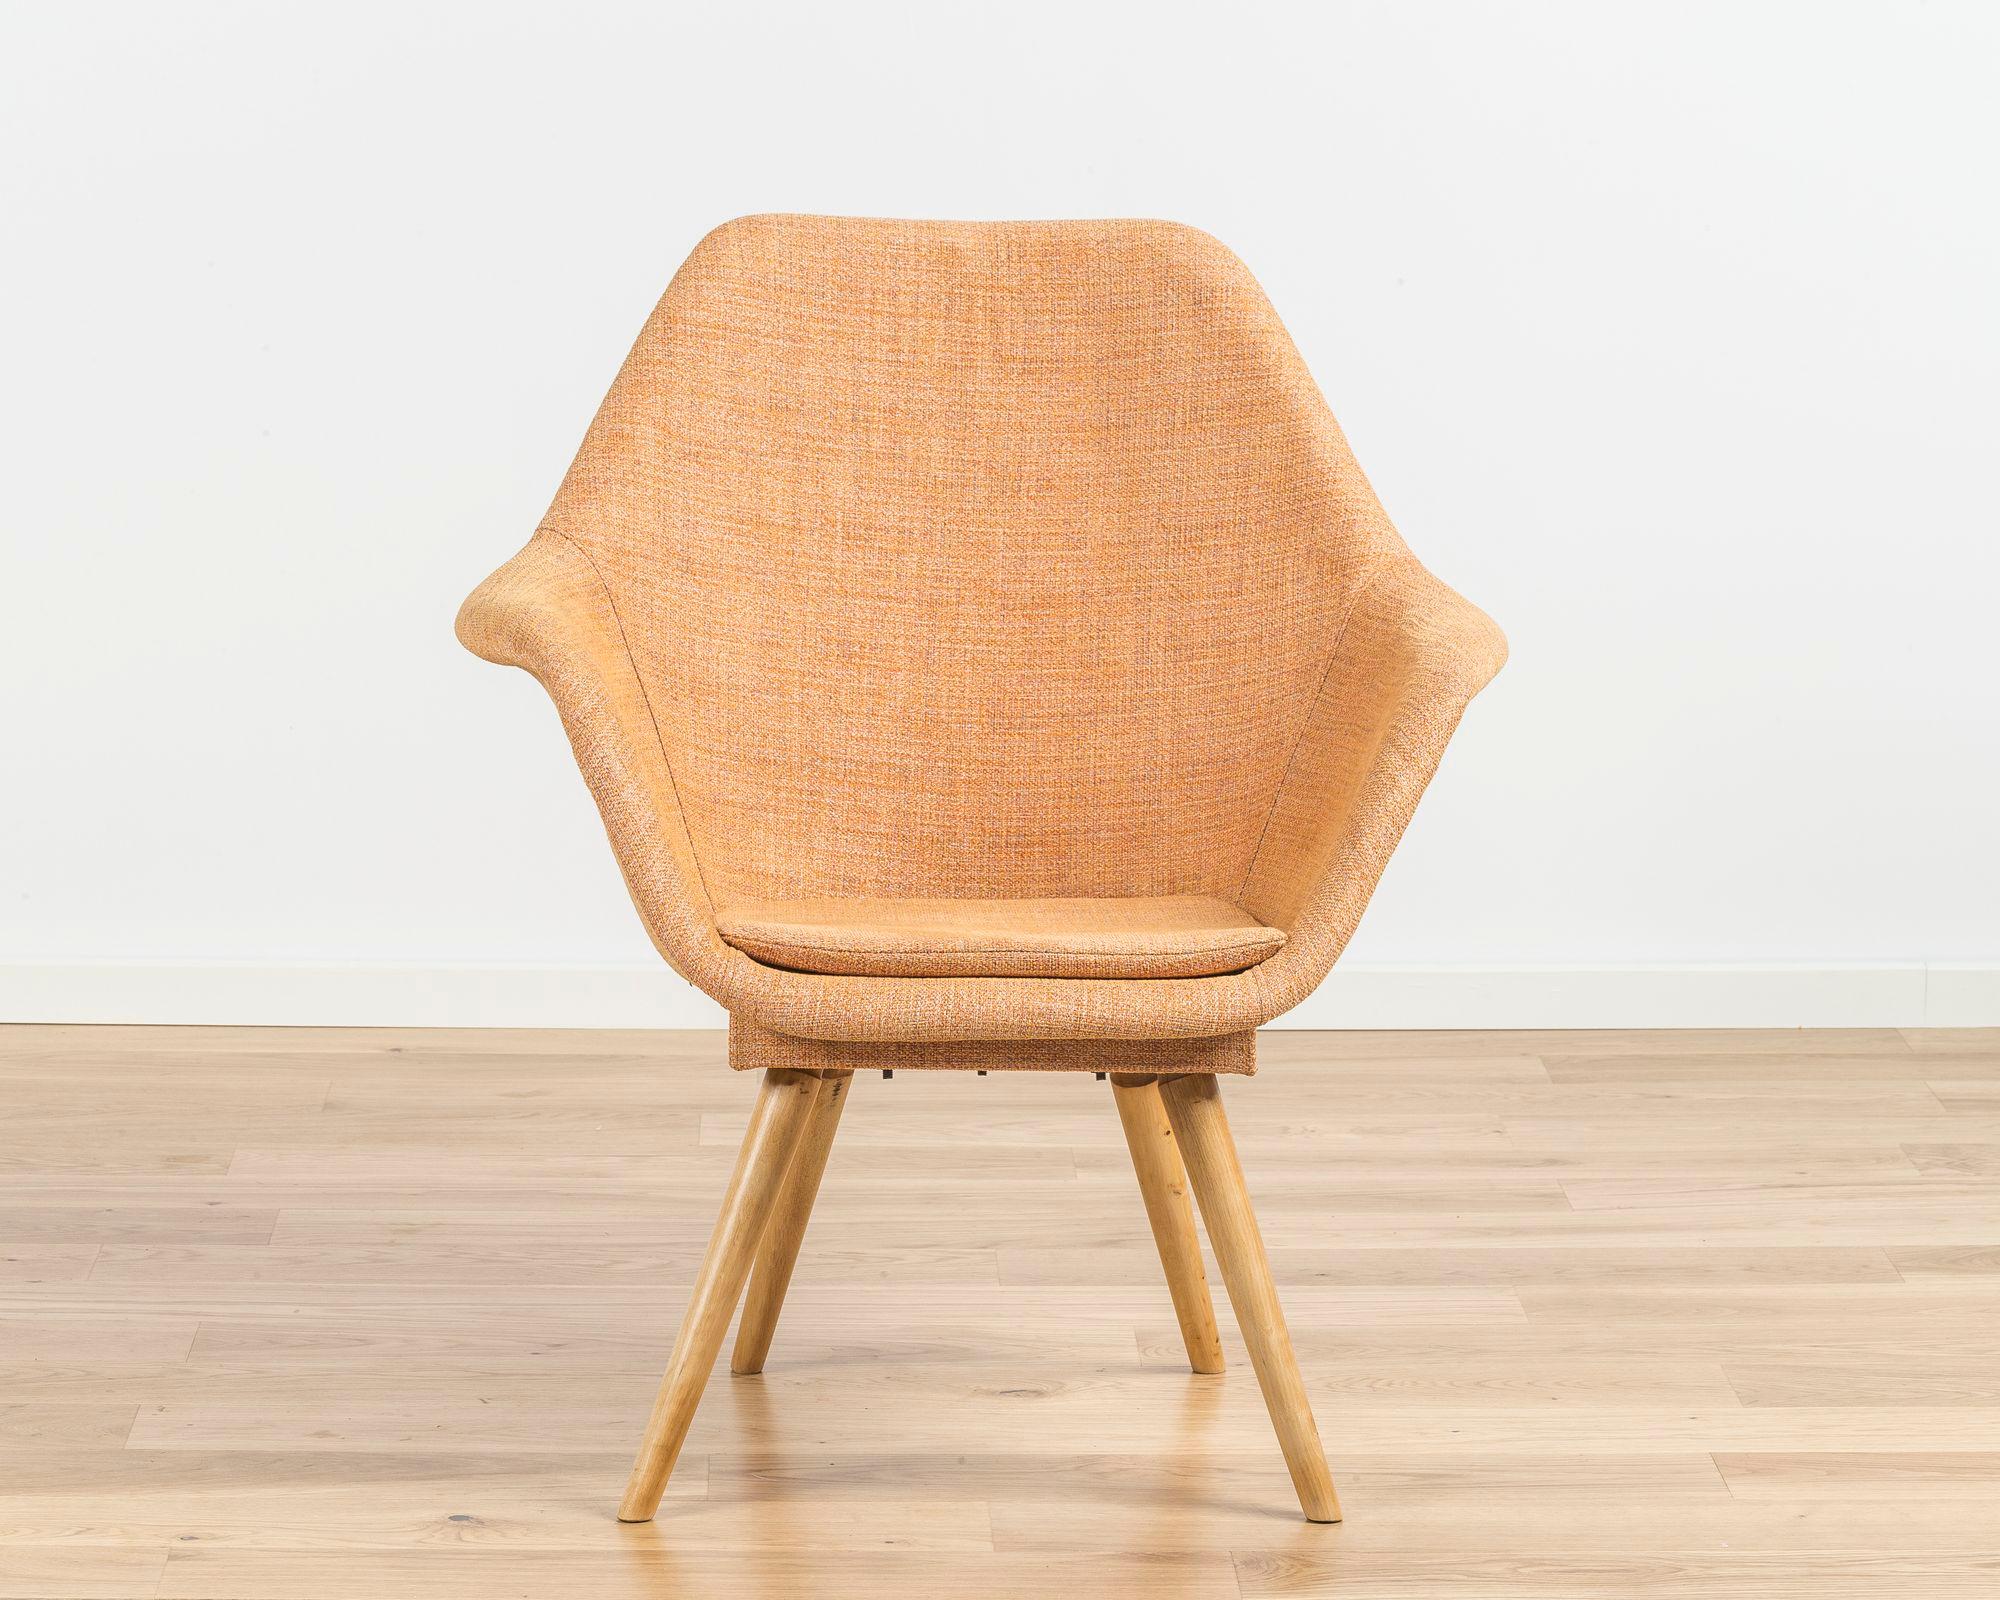 Iconic fiberglass TV chair. Beautiful, original shape of the piece. 
A very rare armchair designed by Miroslav Navrátil, who is considered one of the Czech Republic's most influential designers. He has won numerous awards for his work, including the